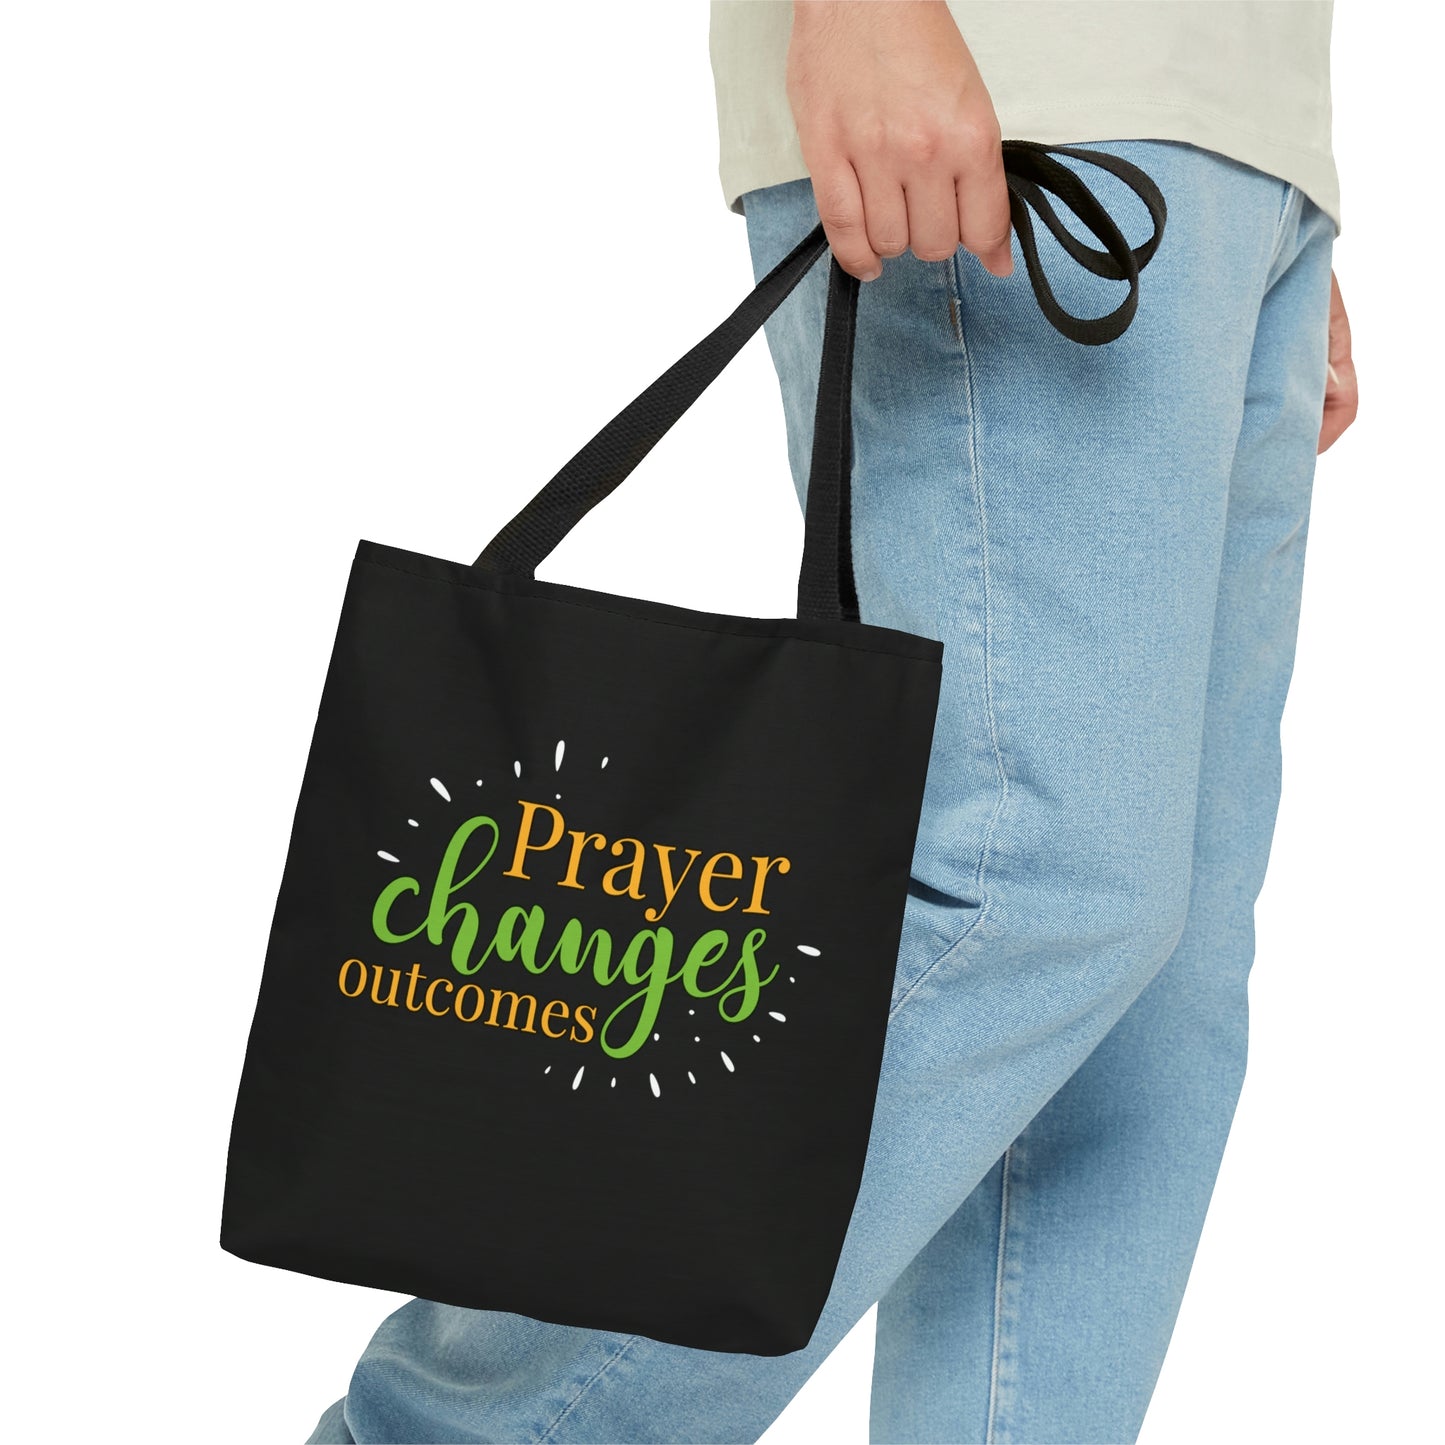 Prayer Changes Outcomes Tote Bag